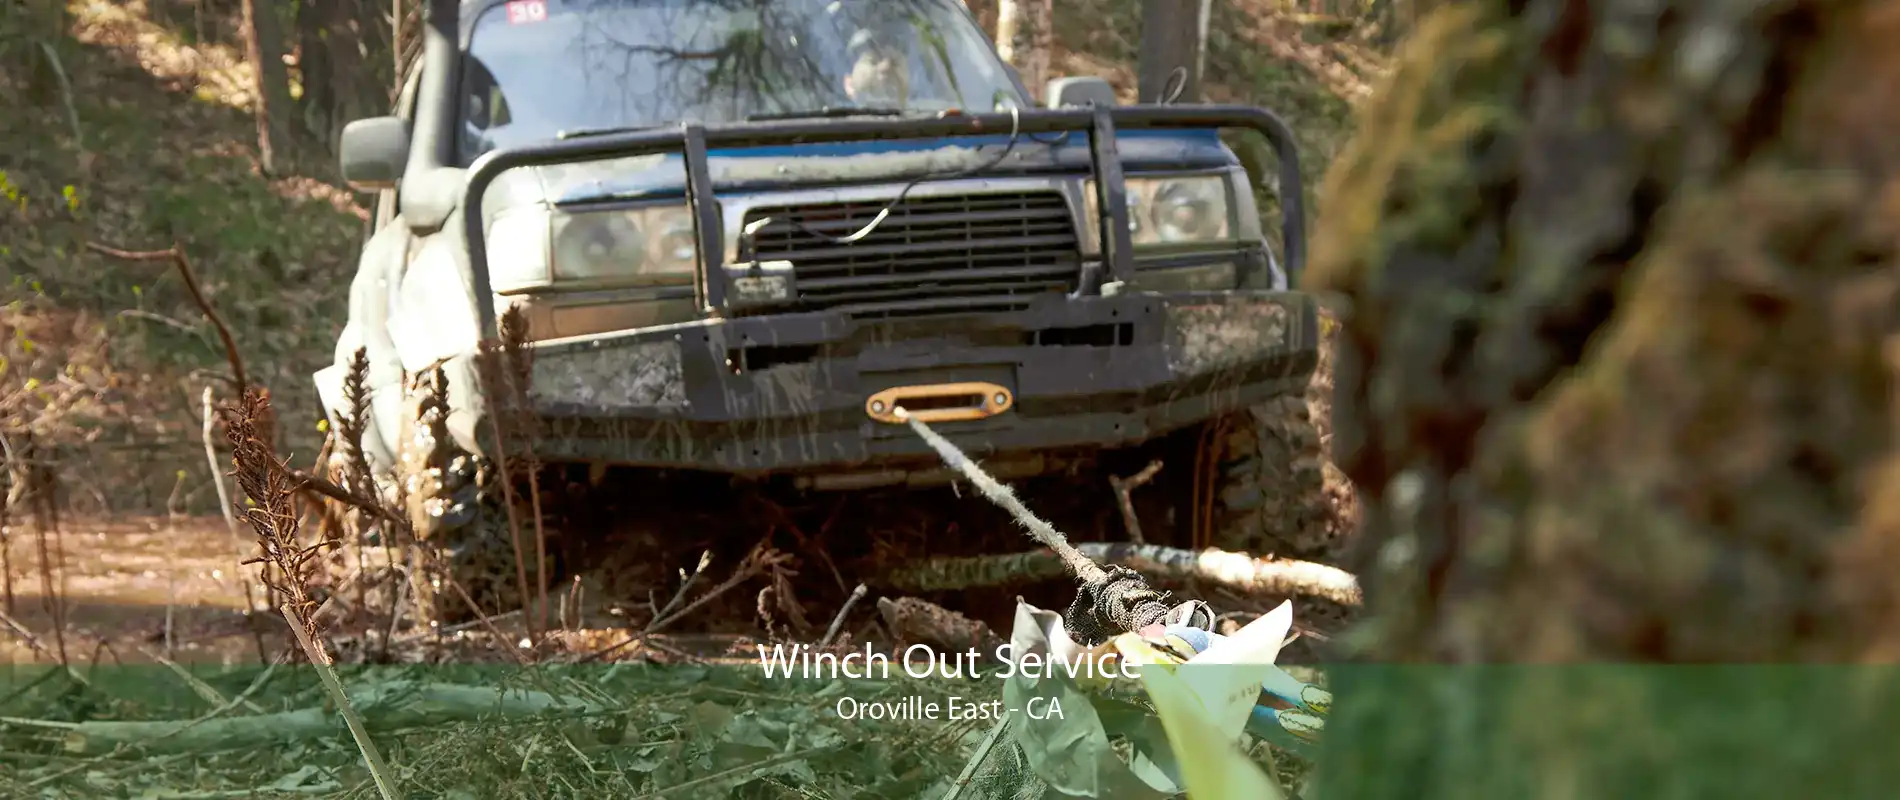 Winch Out Service Oroville East - CA